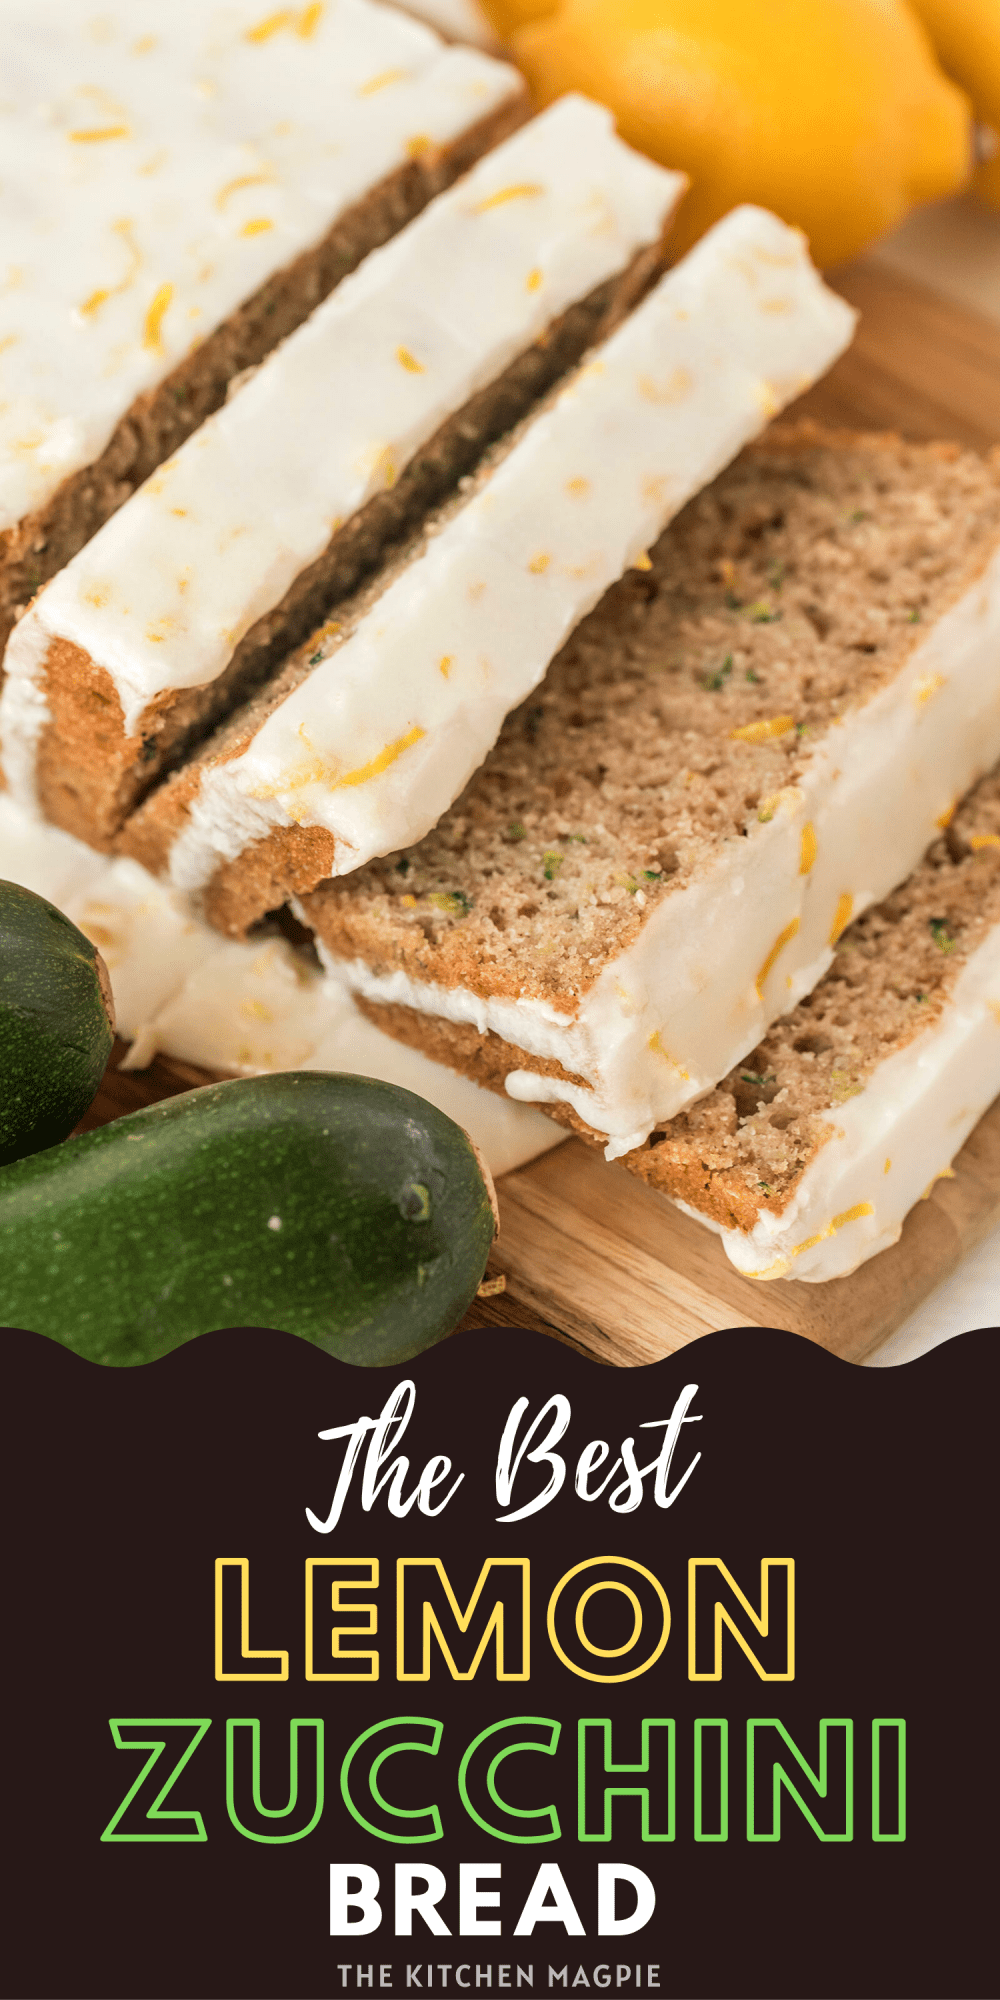 Lemon Zucchini Bread is a fabulous new way to use up zucchini during the summer!